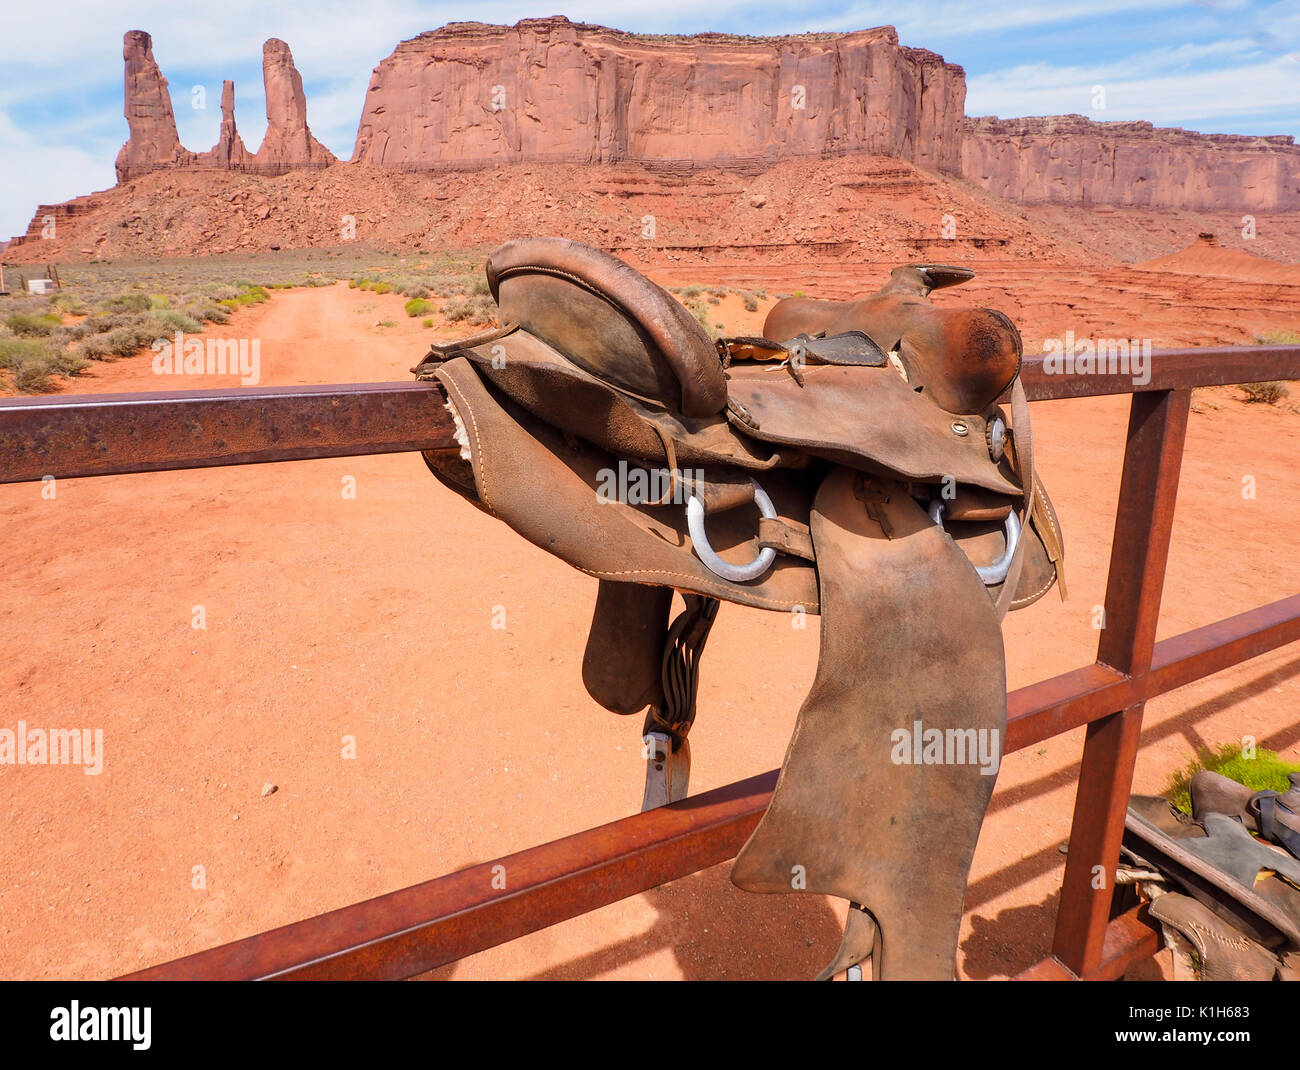 A horse saddle is hanging from a fence at Monument Valley, Stock Photo